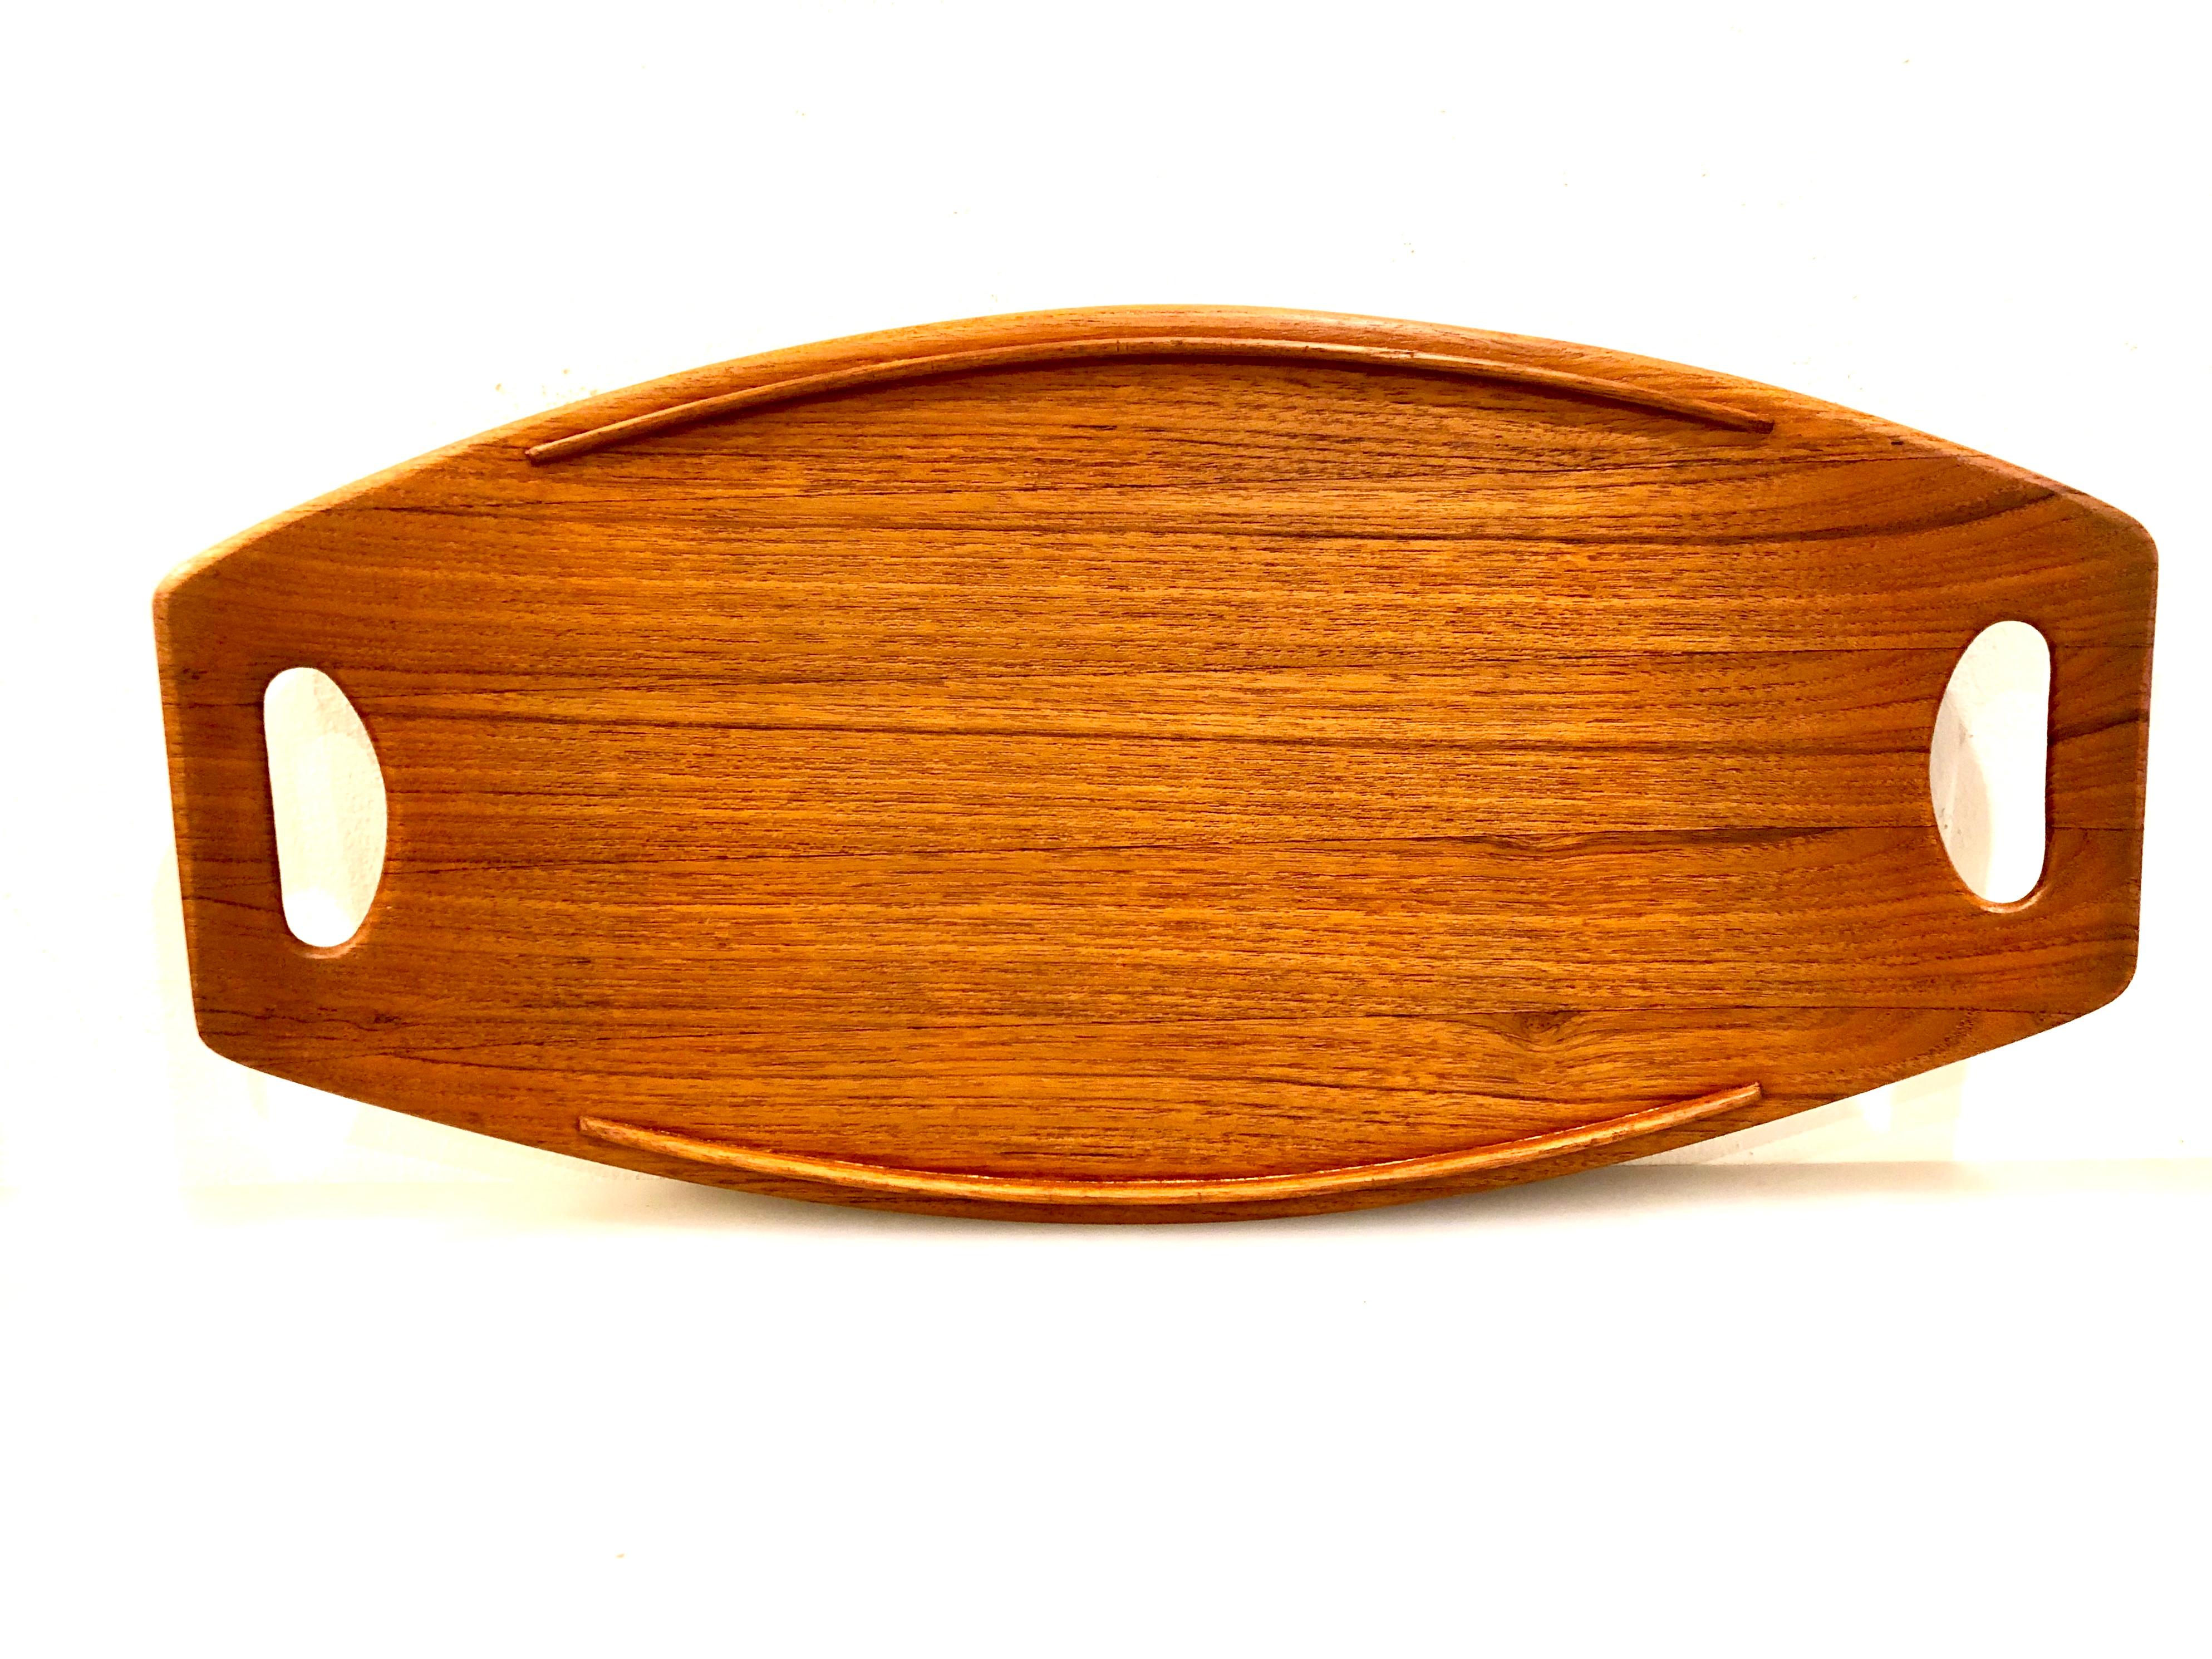 Beautiful solid teak gondola tray designed by Jens Quistgaard for Dansk; early production. Nice condition with raised edges and elegant lines. The large tray is 20 1/2